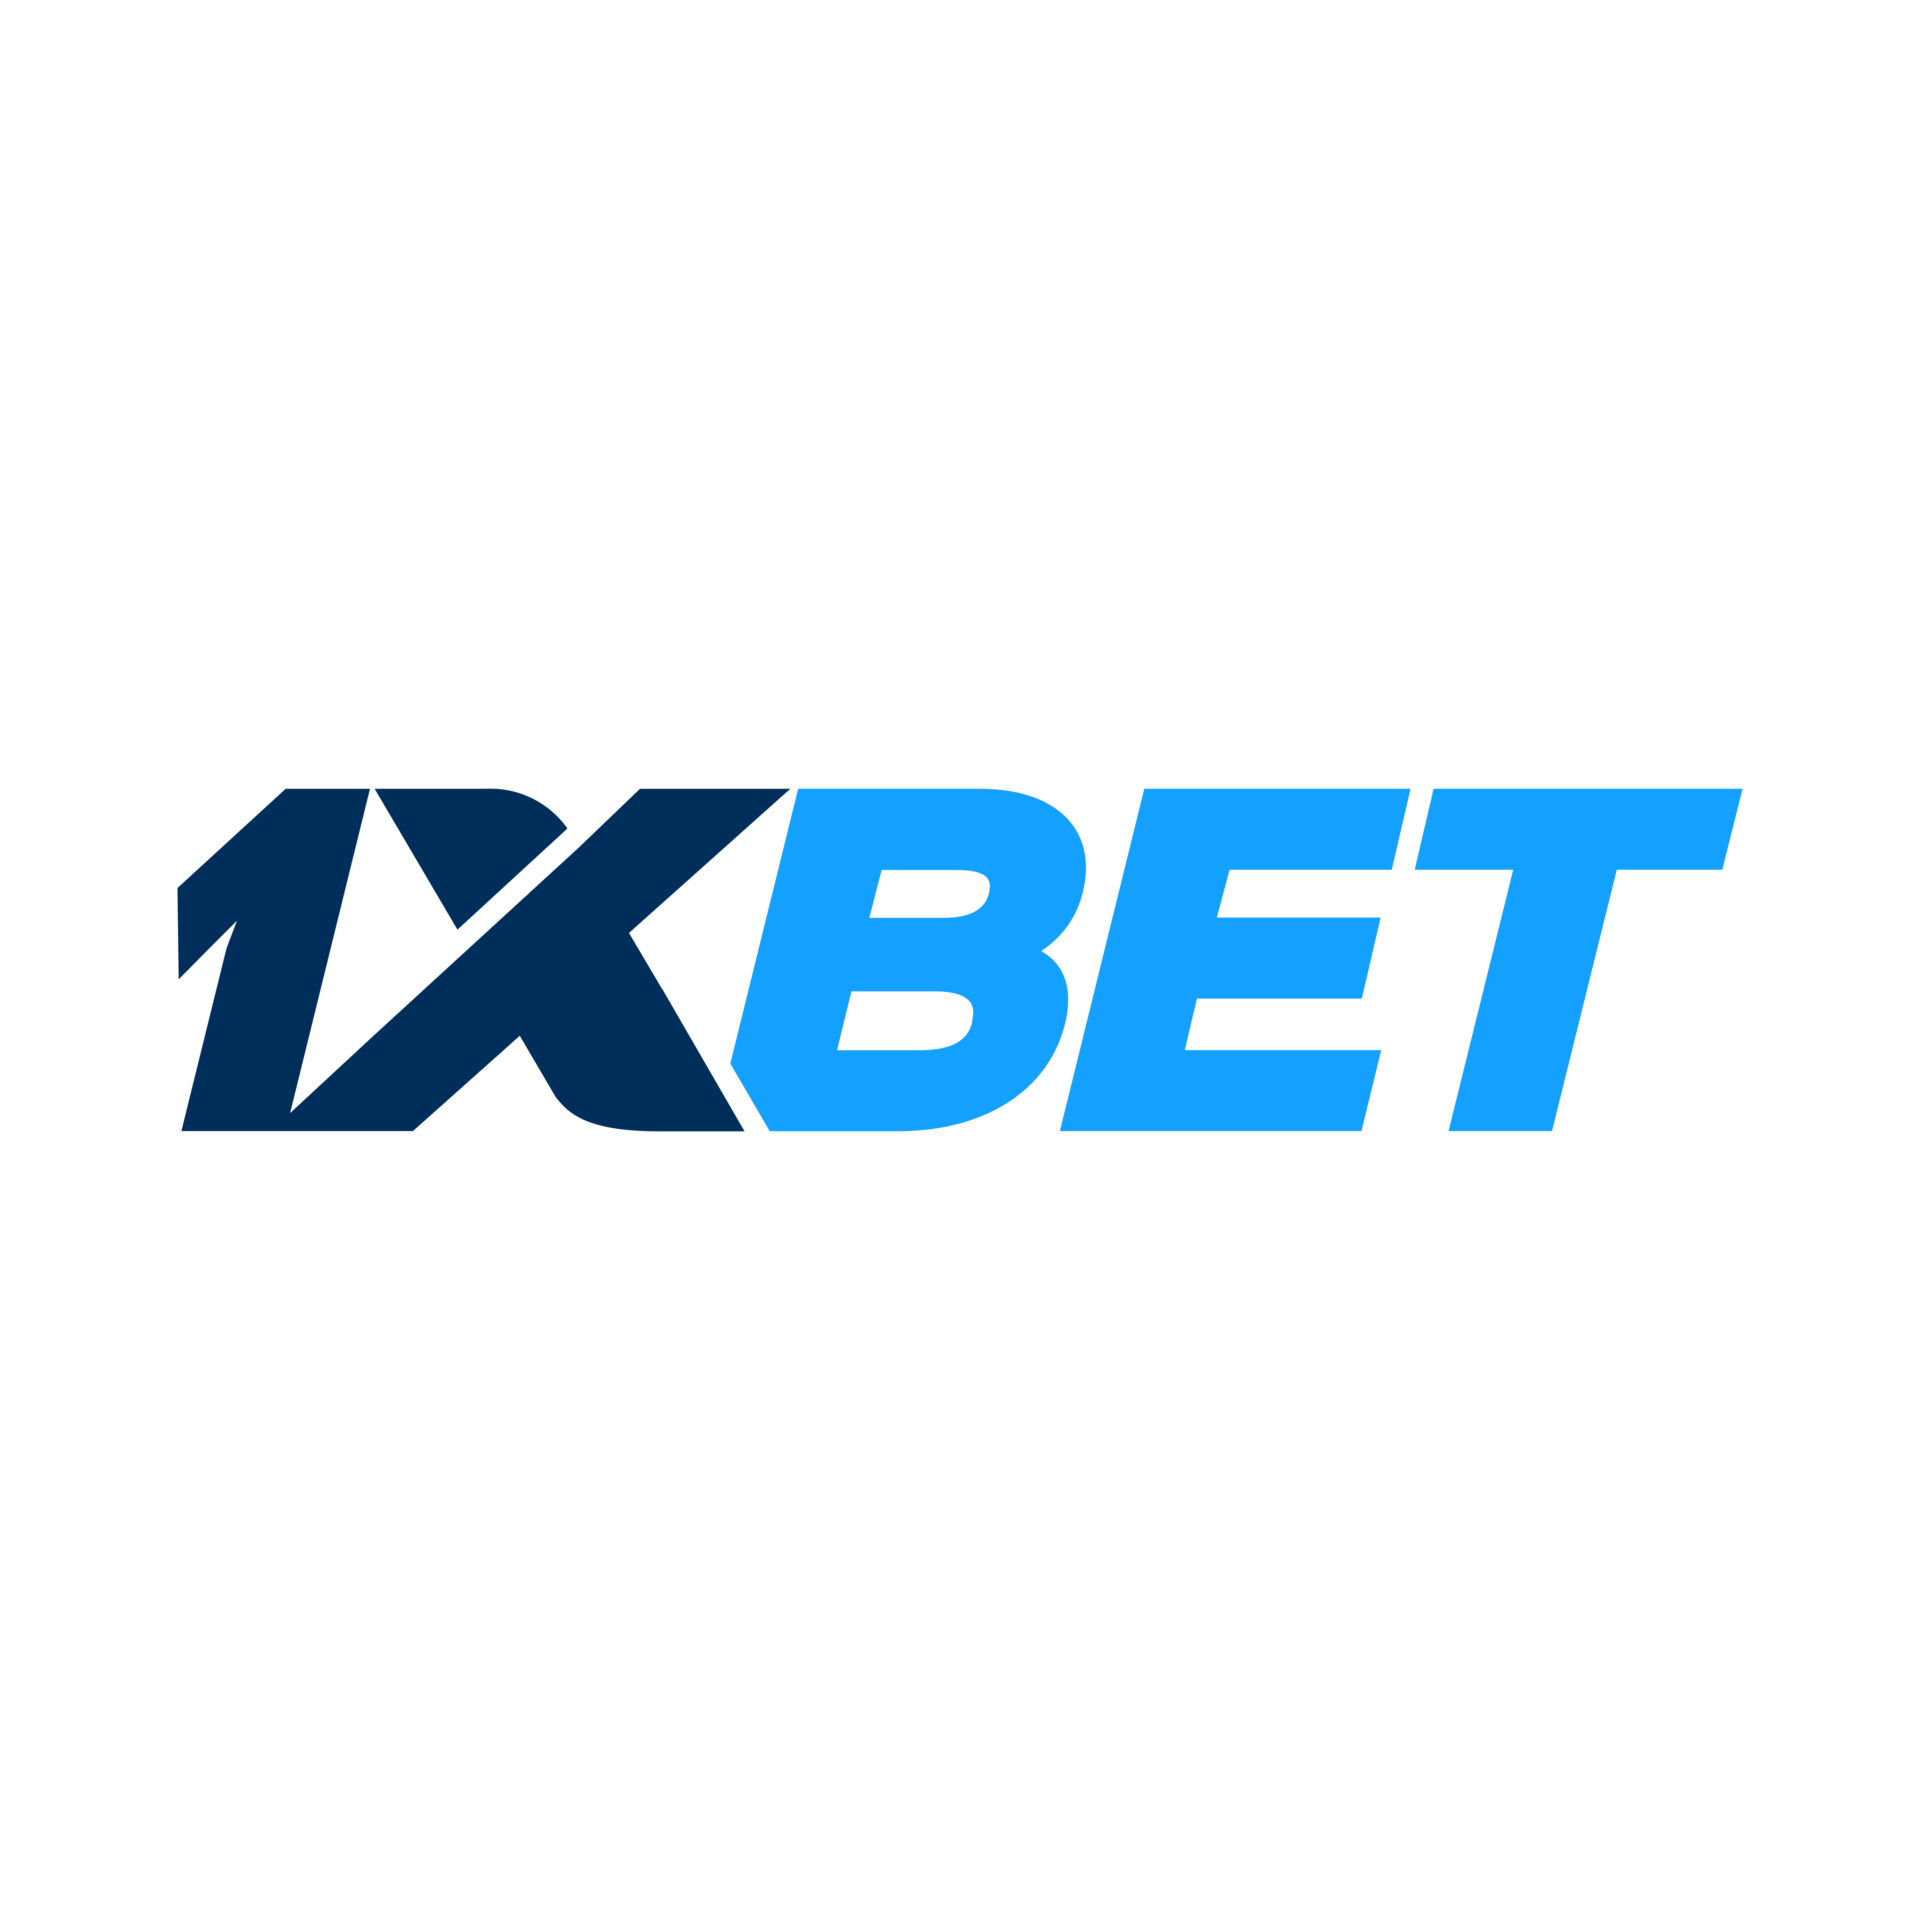 Why Some People Almost Always Make Money With 1xBet